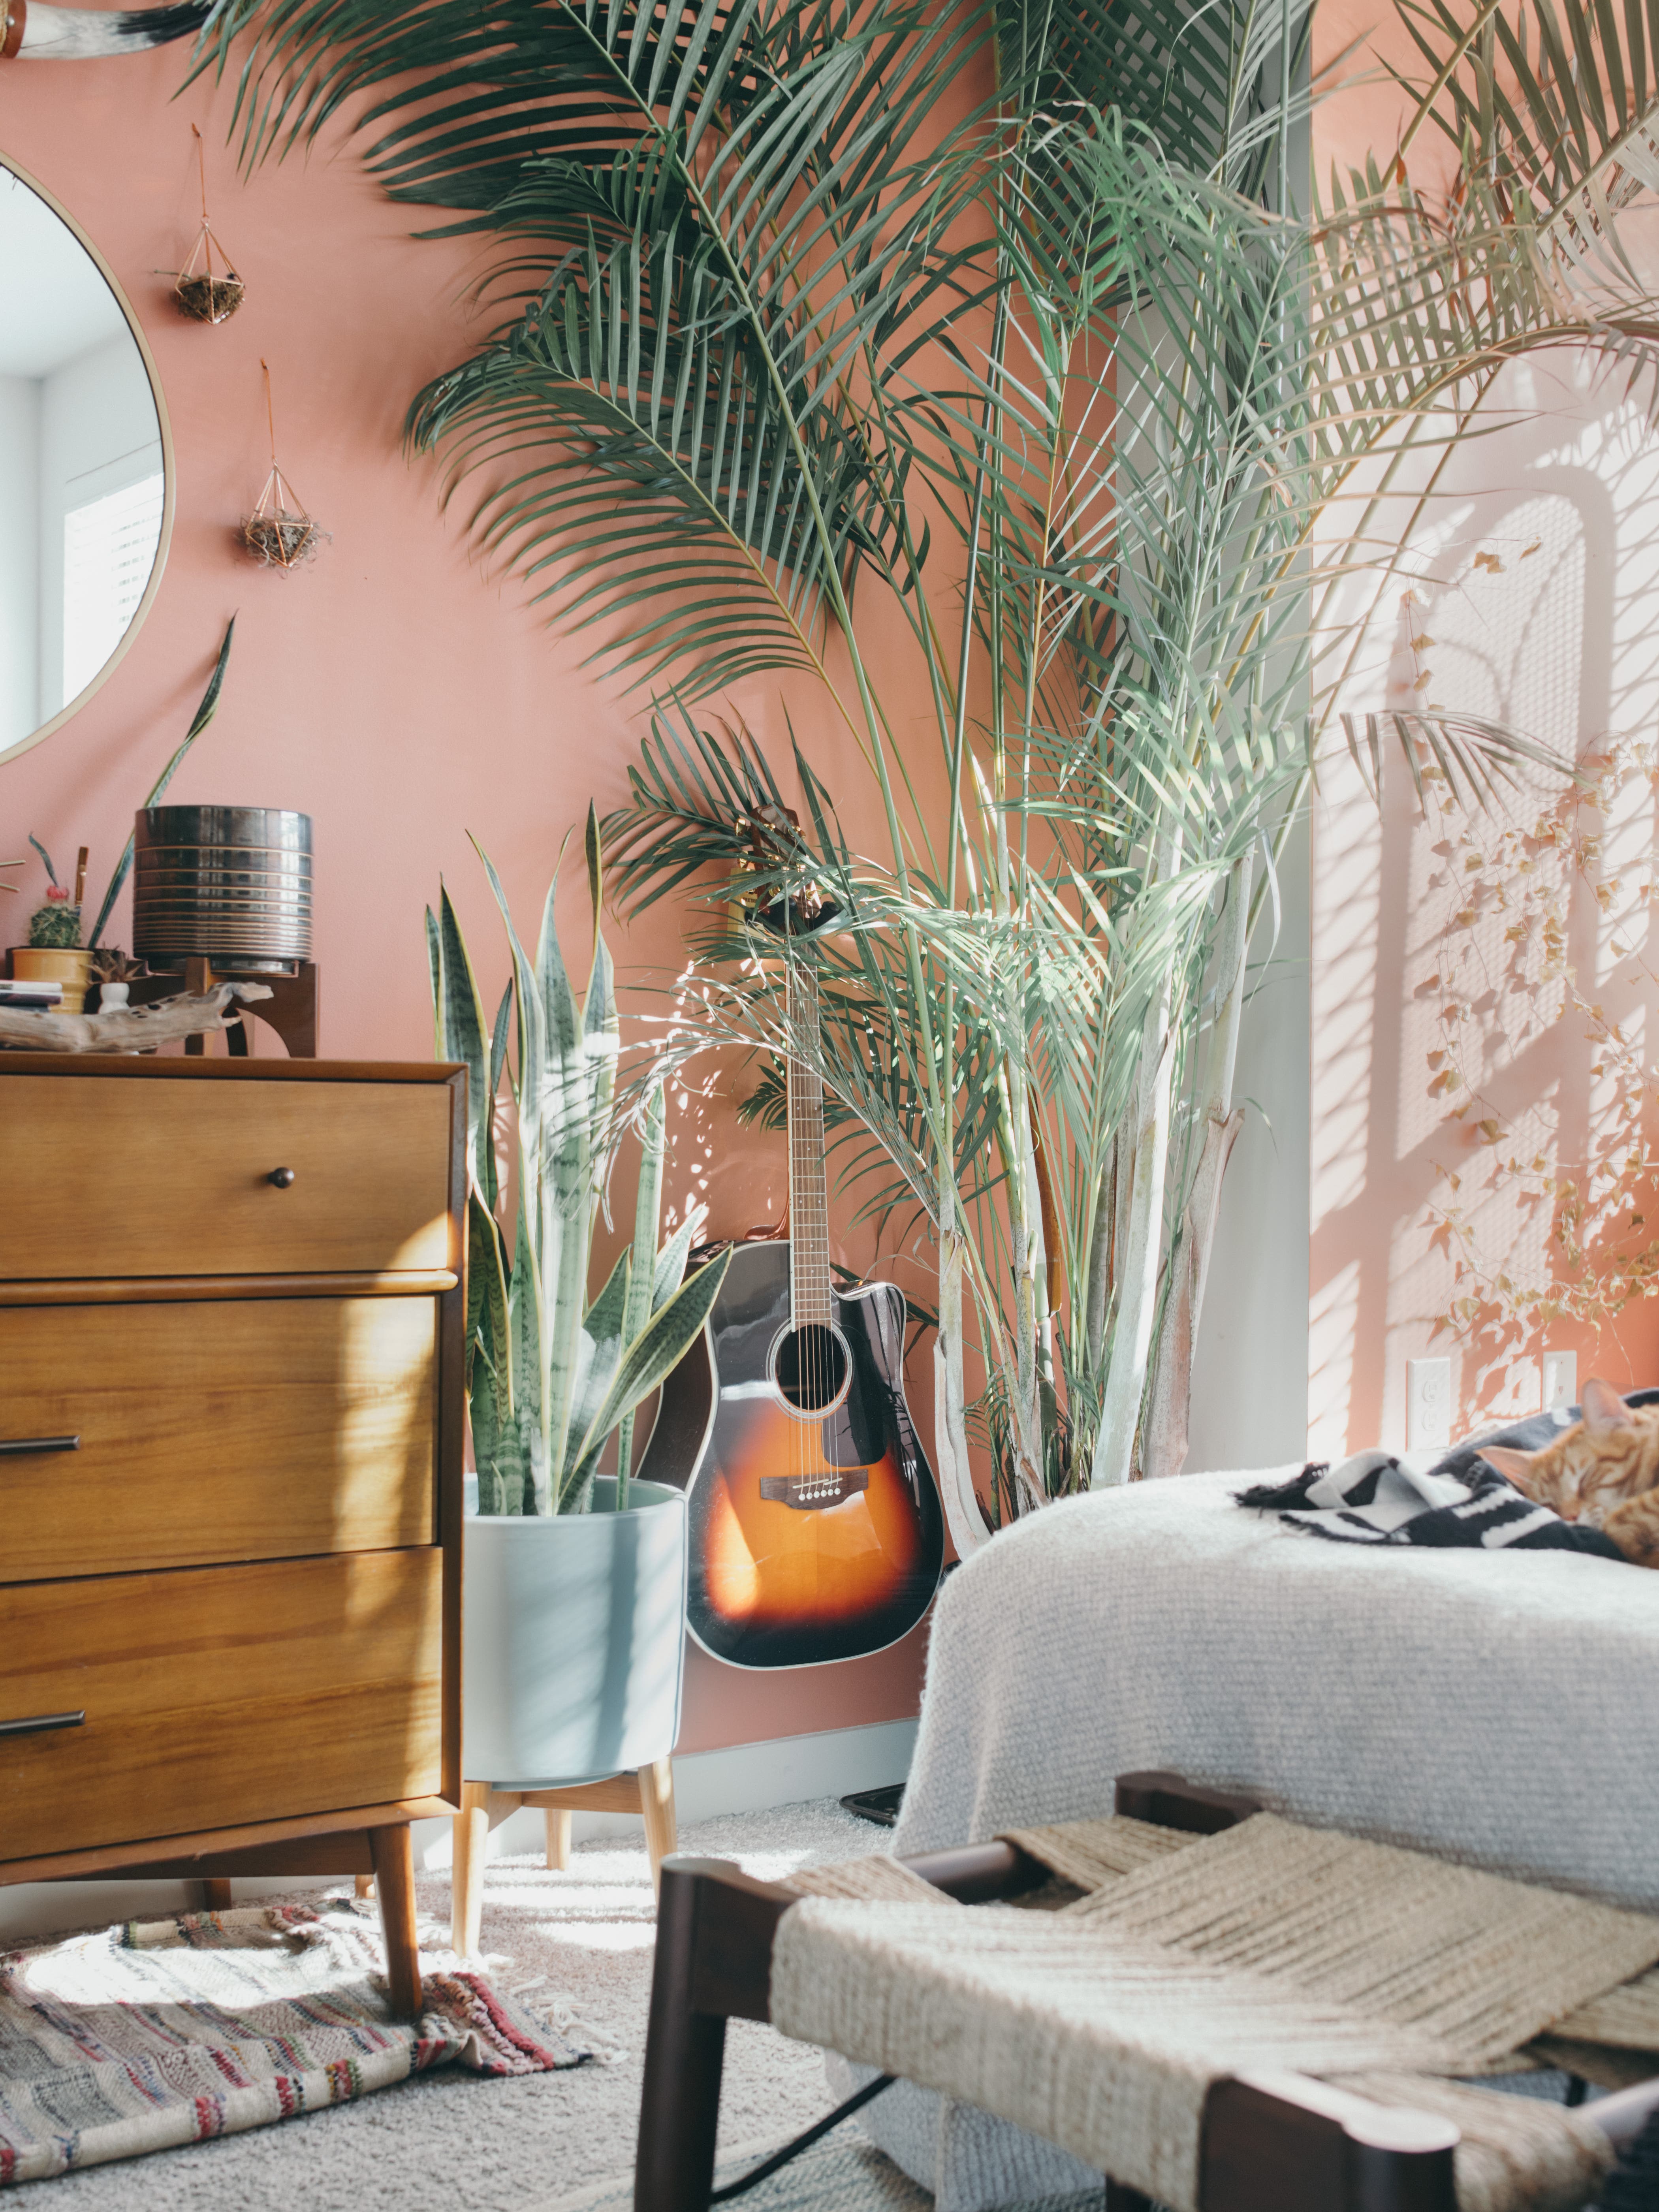 This 700-Square-Foot Apartment Is Home to Over 70 Plants